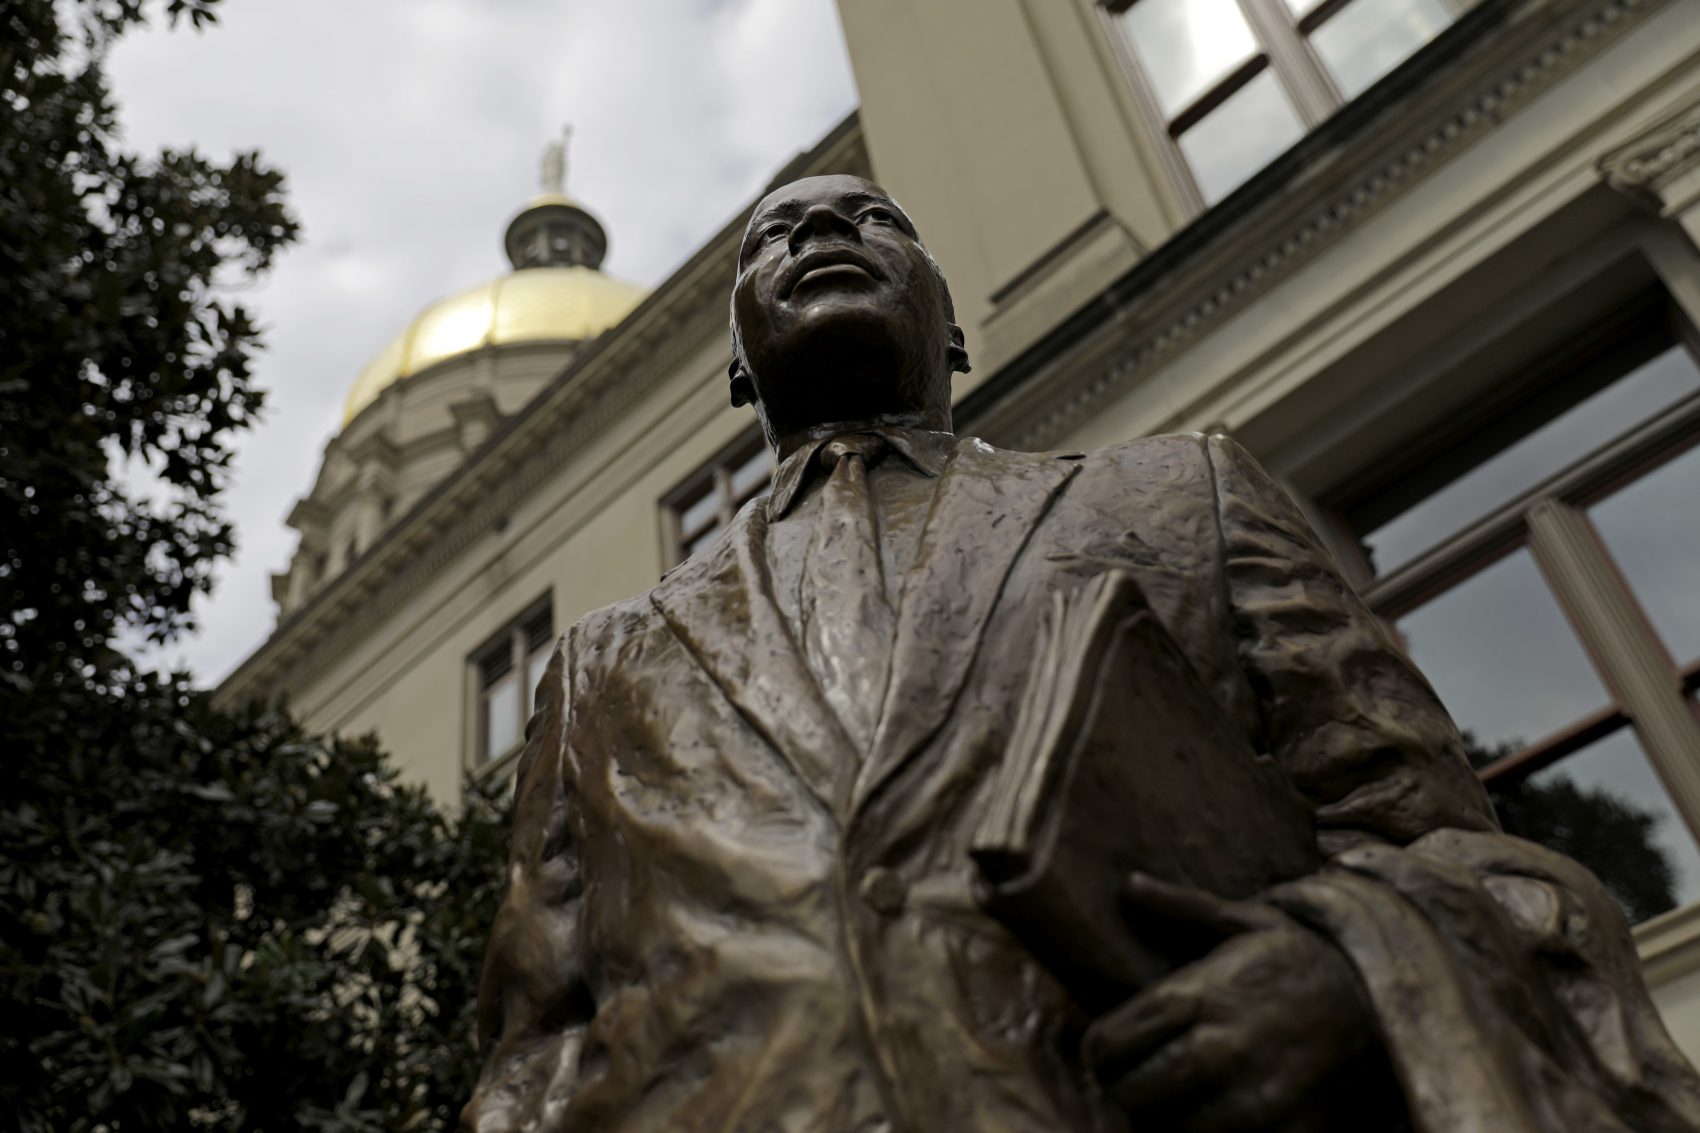 Boston Seeks A New Statue To Honor Martin Luther King Jr.'s Legacy ...